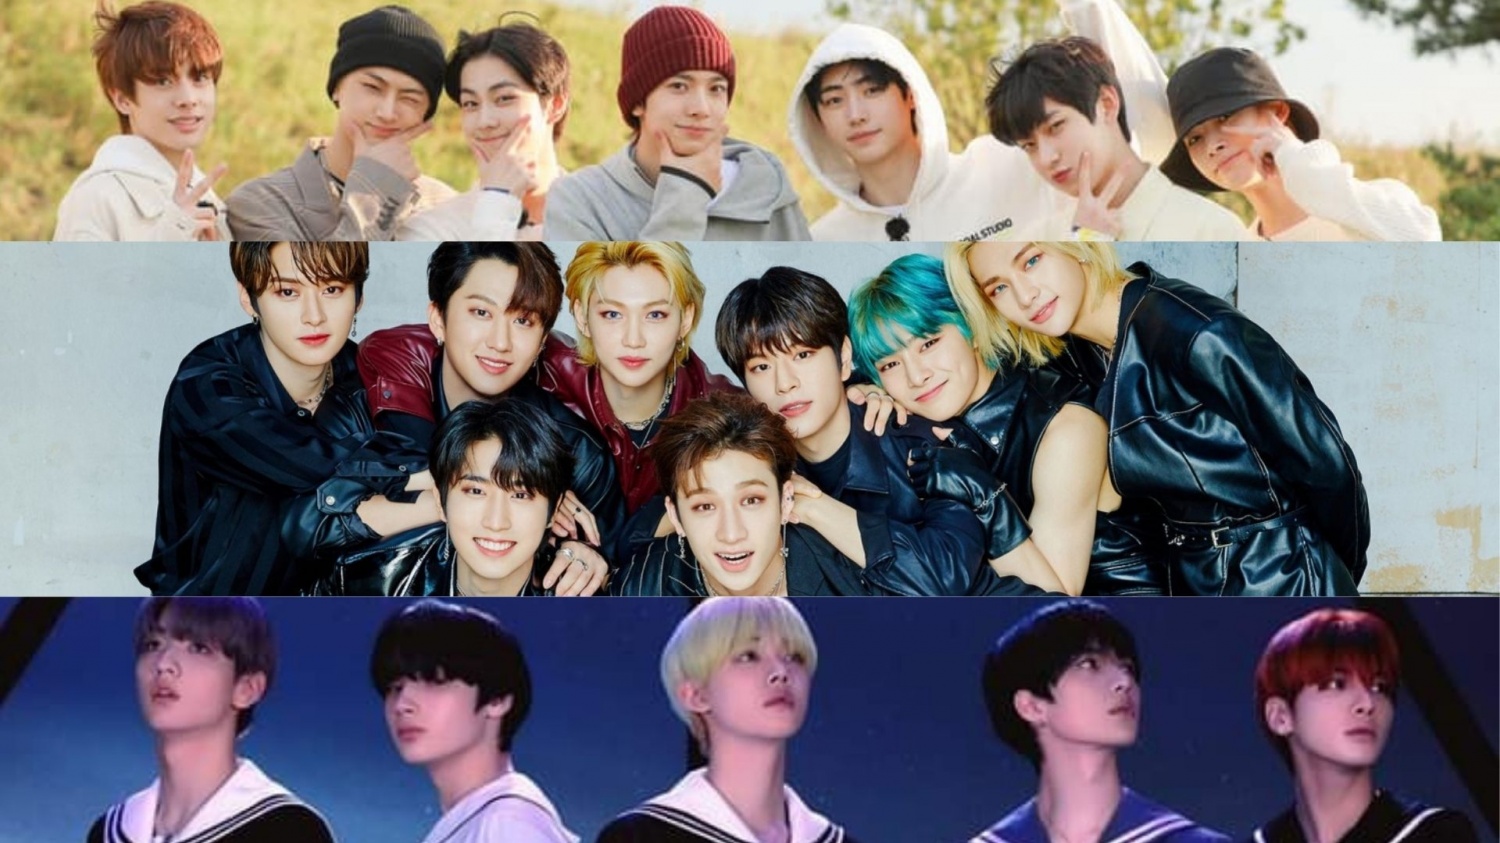 Image for ENHYPEN, Stray Kids, TXT and More: These 4th Gen Groups are Loved by Korean Teens Nowadays